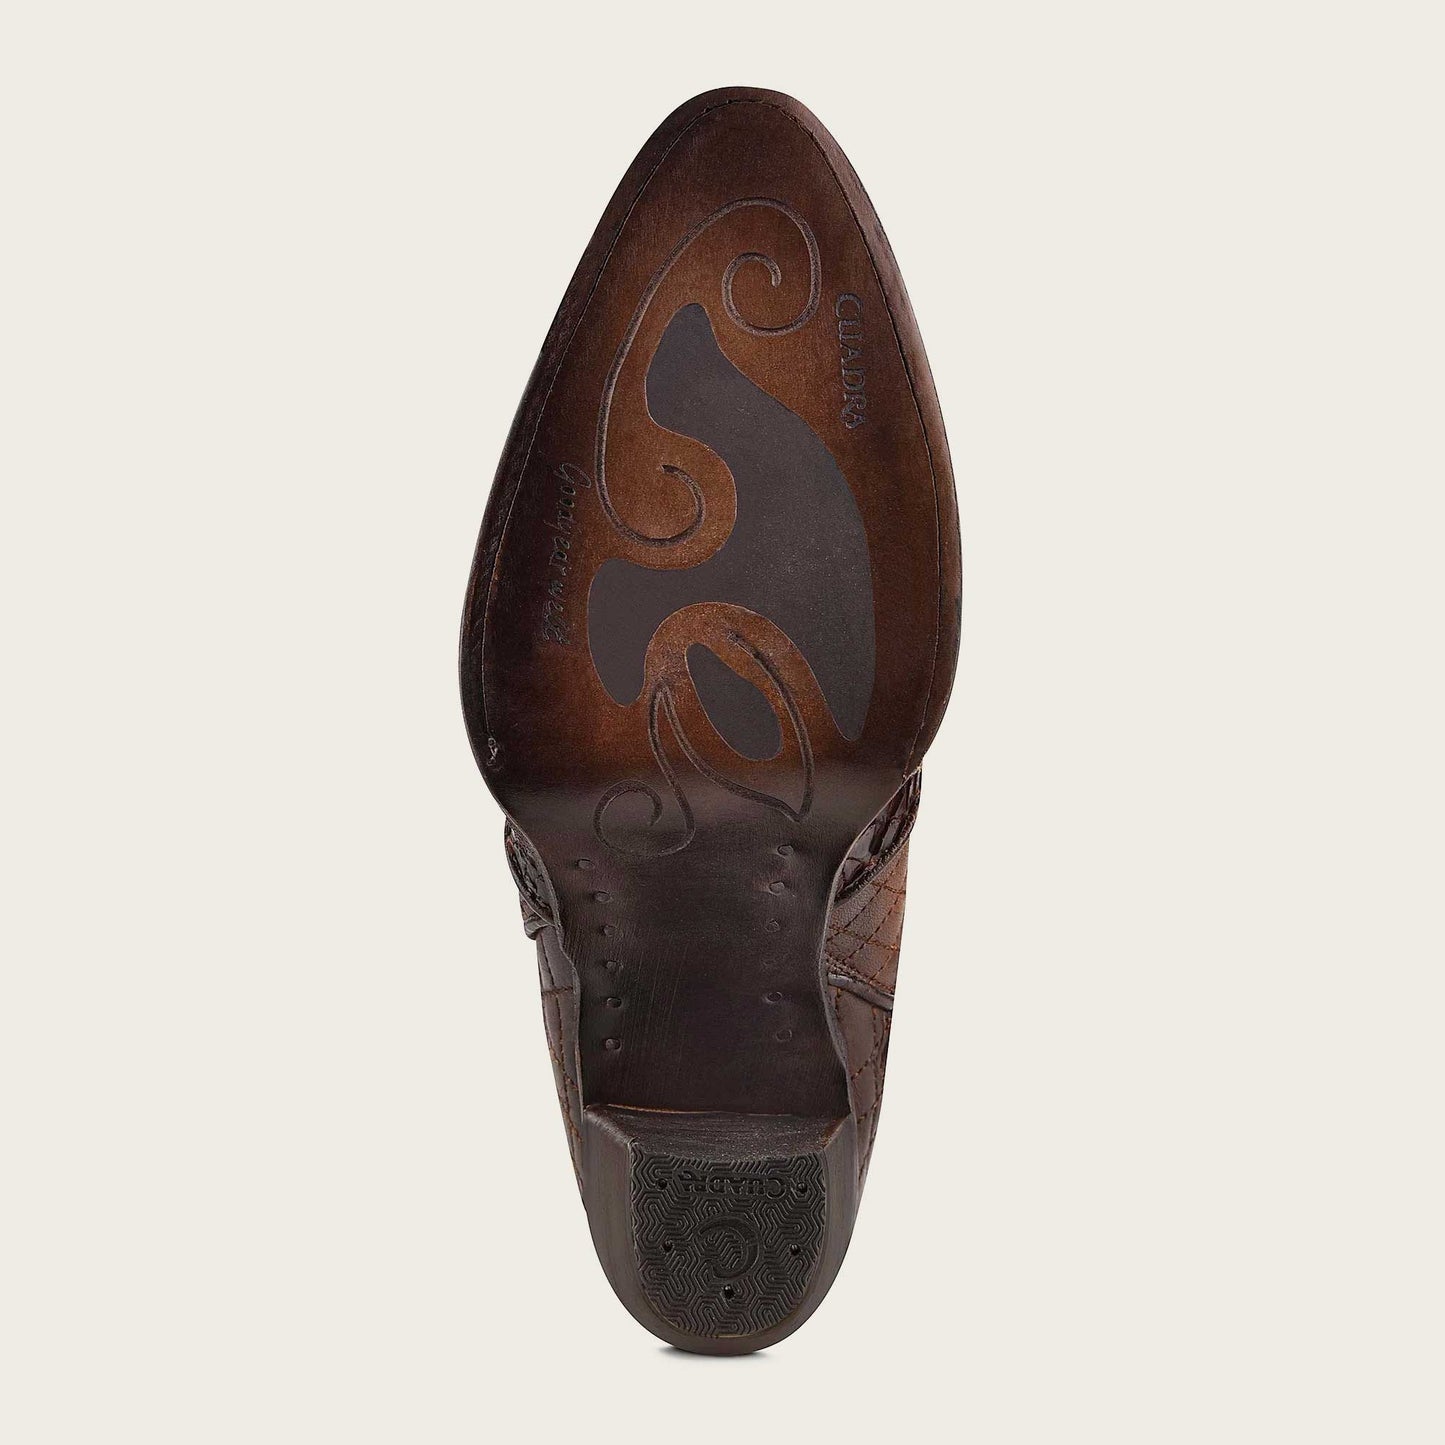 Brown leather engraved boots, for women - 3F66PH - Cuadra Shop